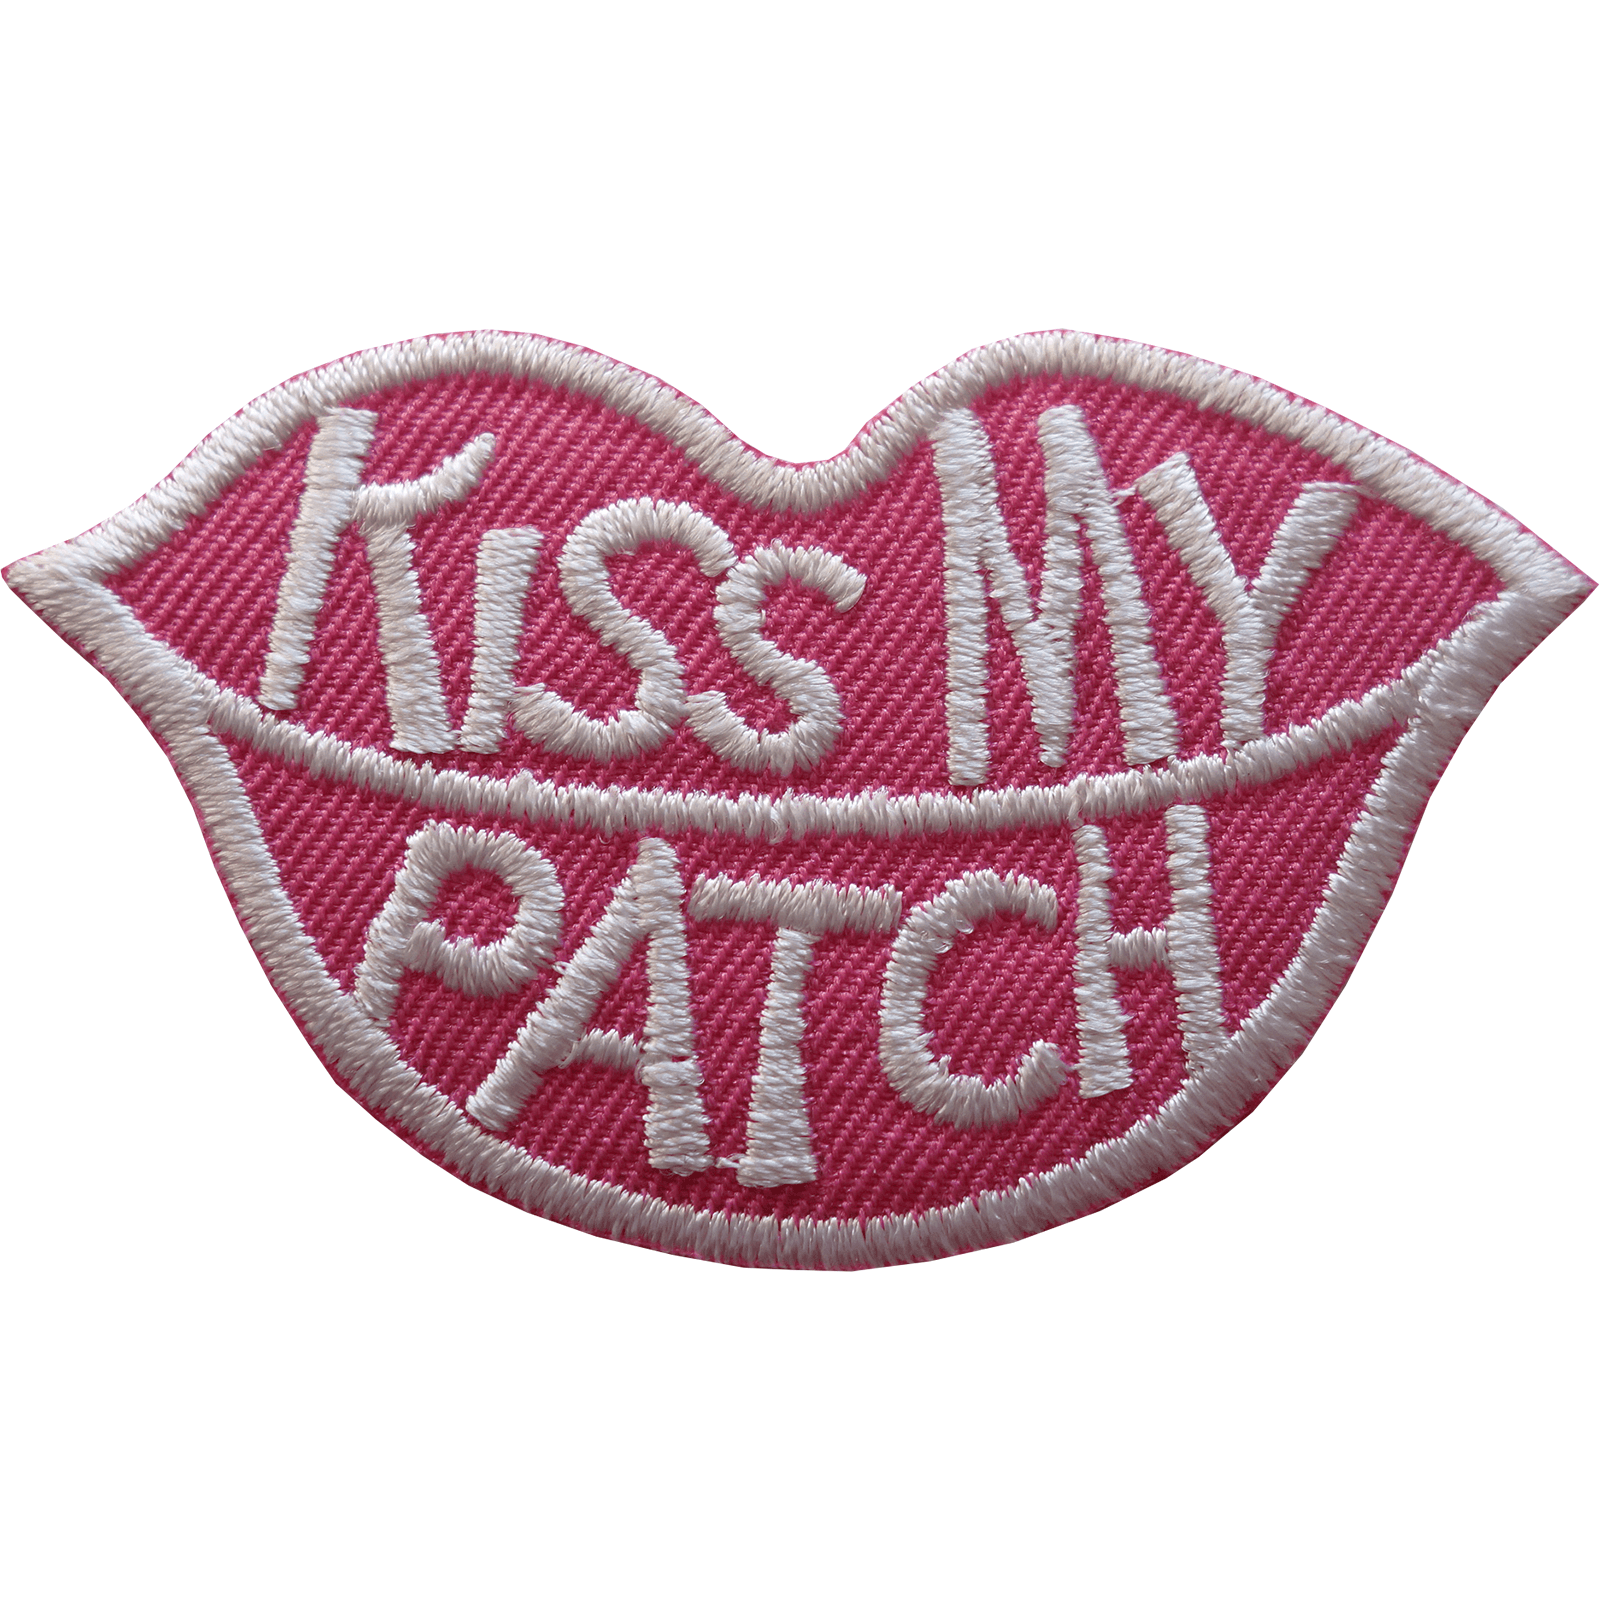 Kiss My Patch Iron Sew On T Shirt Jeans Jacket Bag Pink Lips Embroidered Badge